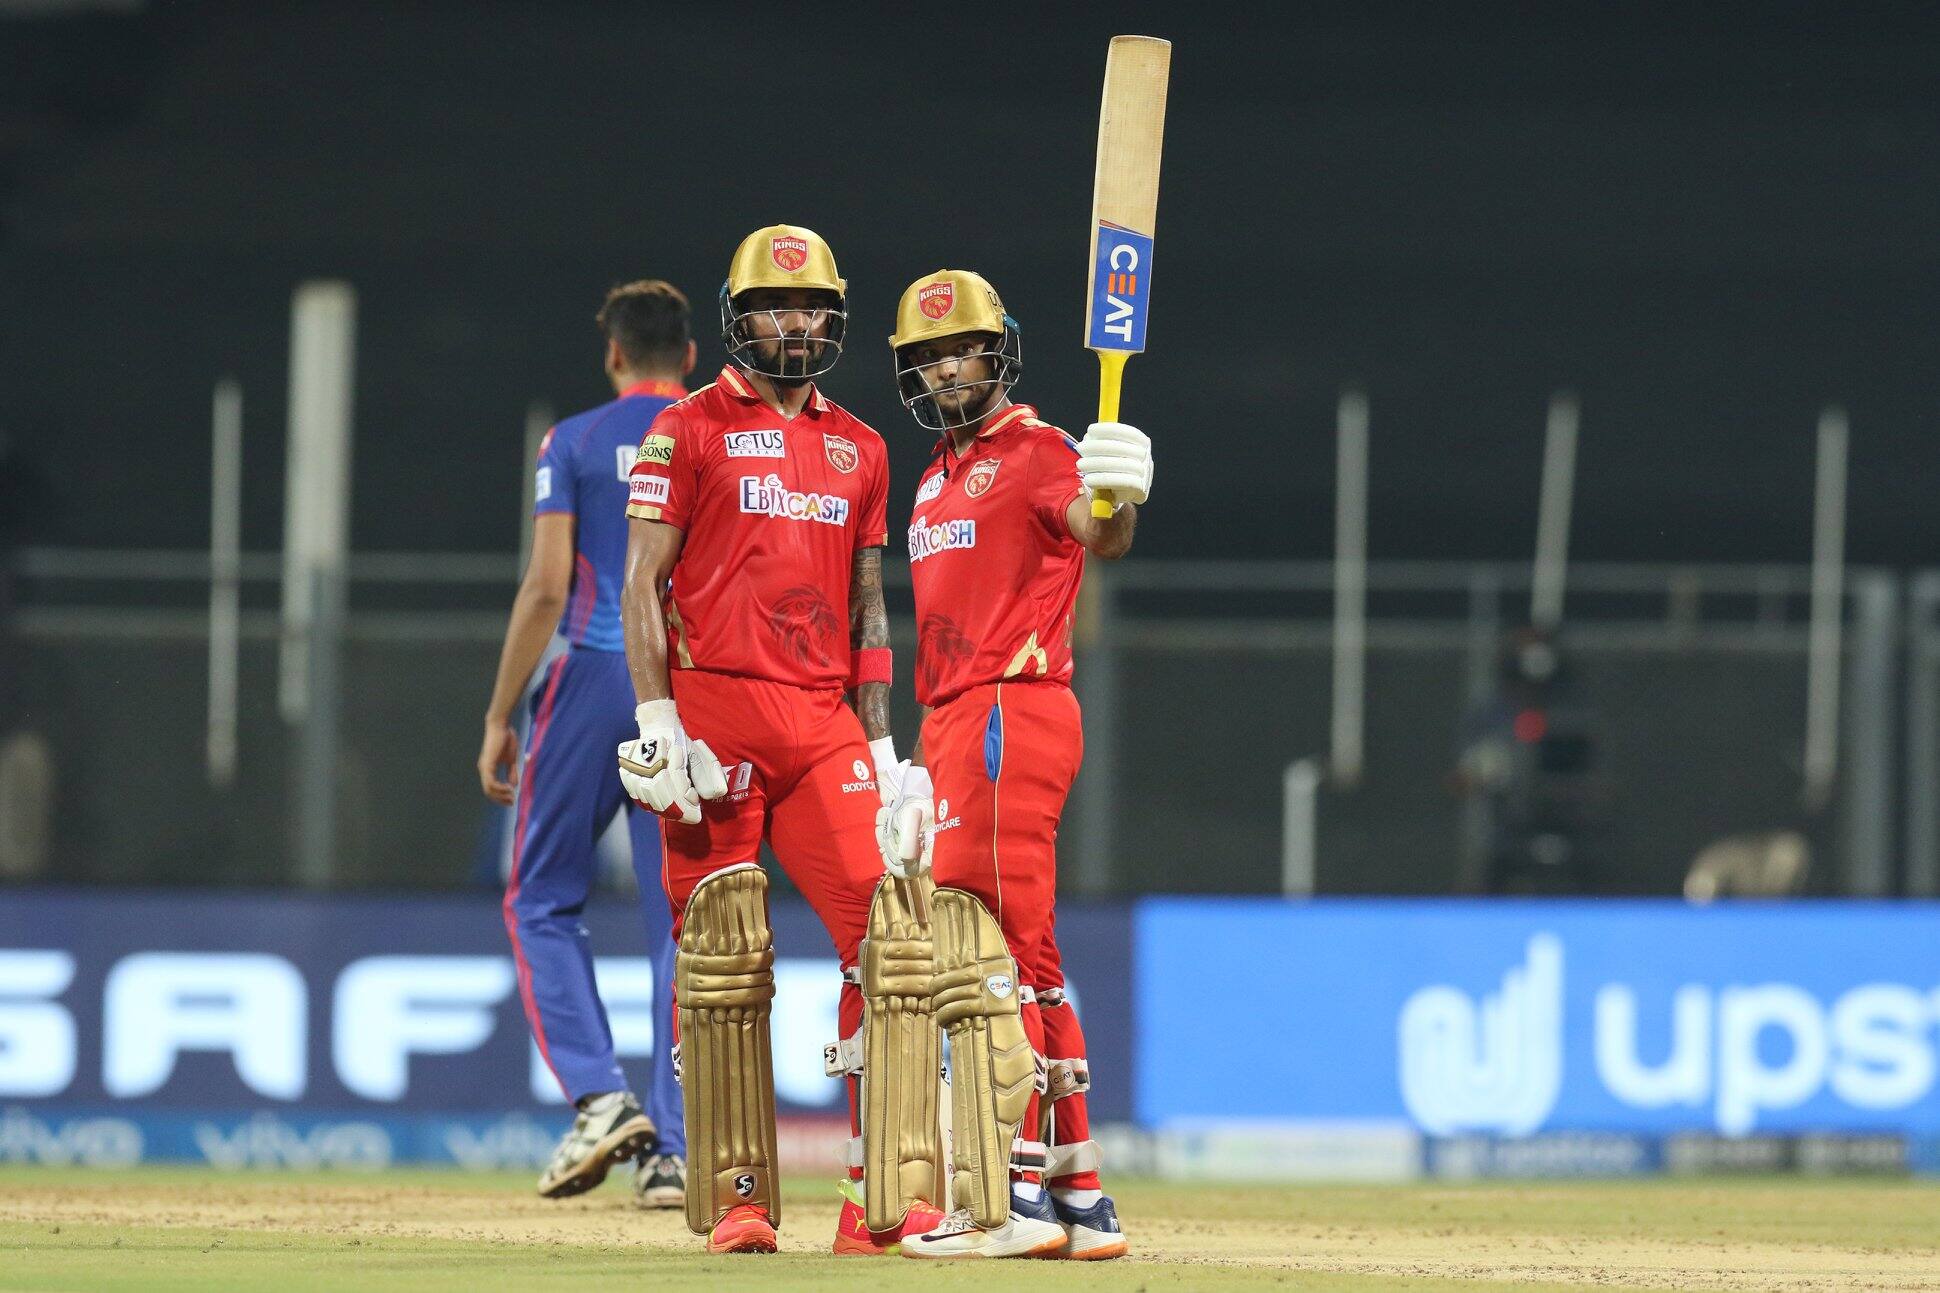 Punjab Kings opener Mayank Agarwal acknowledges the cheers after completing a fifty against Delhi Capital in their IPL 2021 clash. (Photo: IPL)